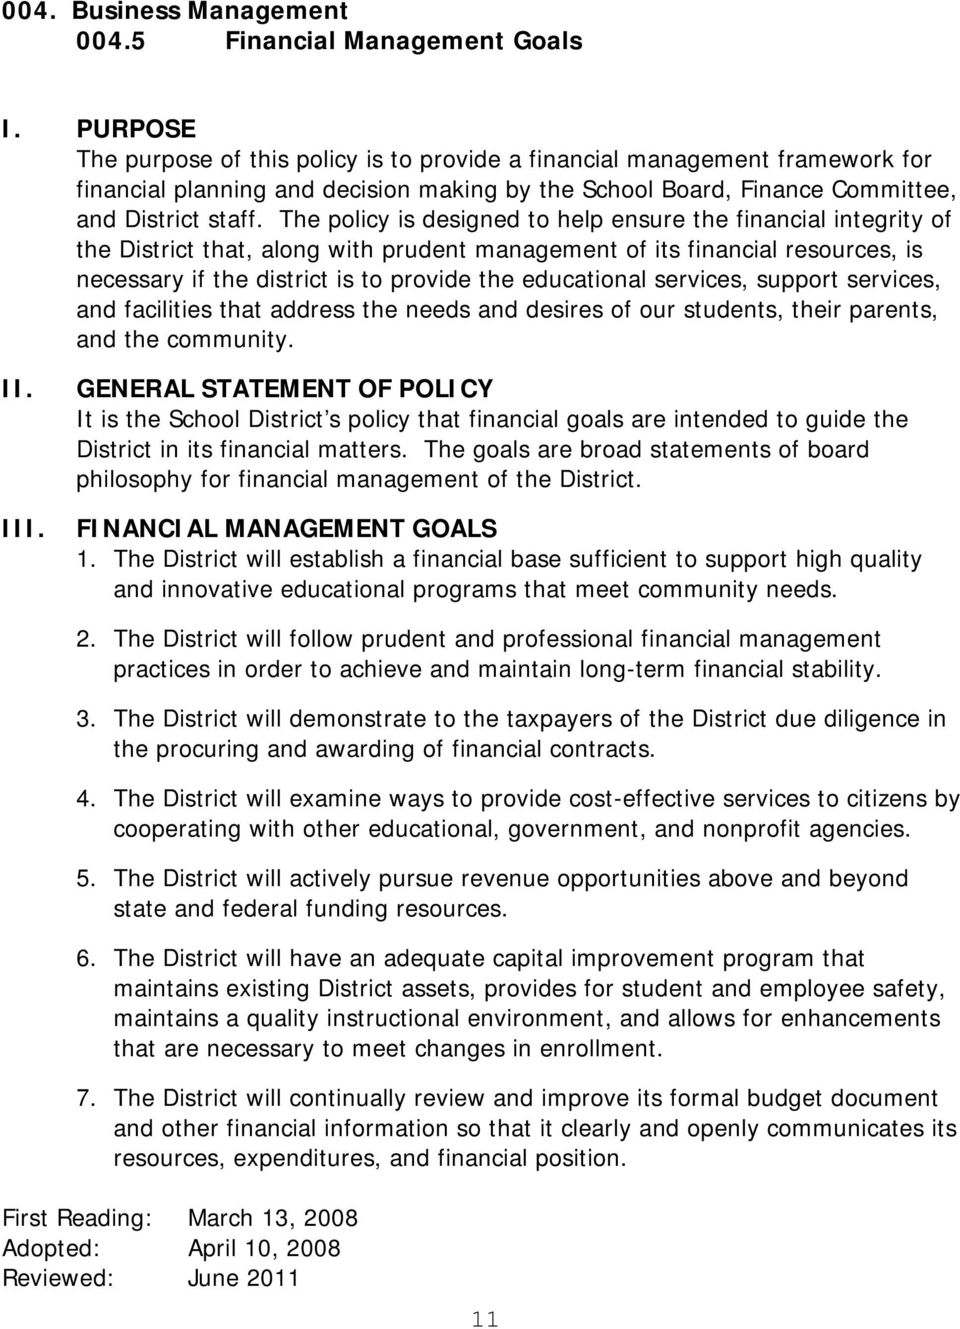 The policy is designed to help ensure the financial integrity of the District that, along with prudent management of its financial resources, is necessary if the district is to provide the